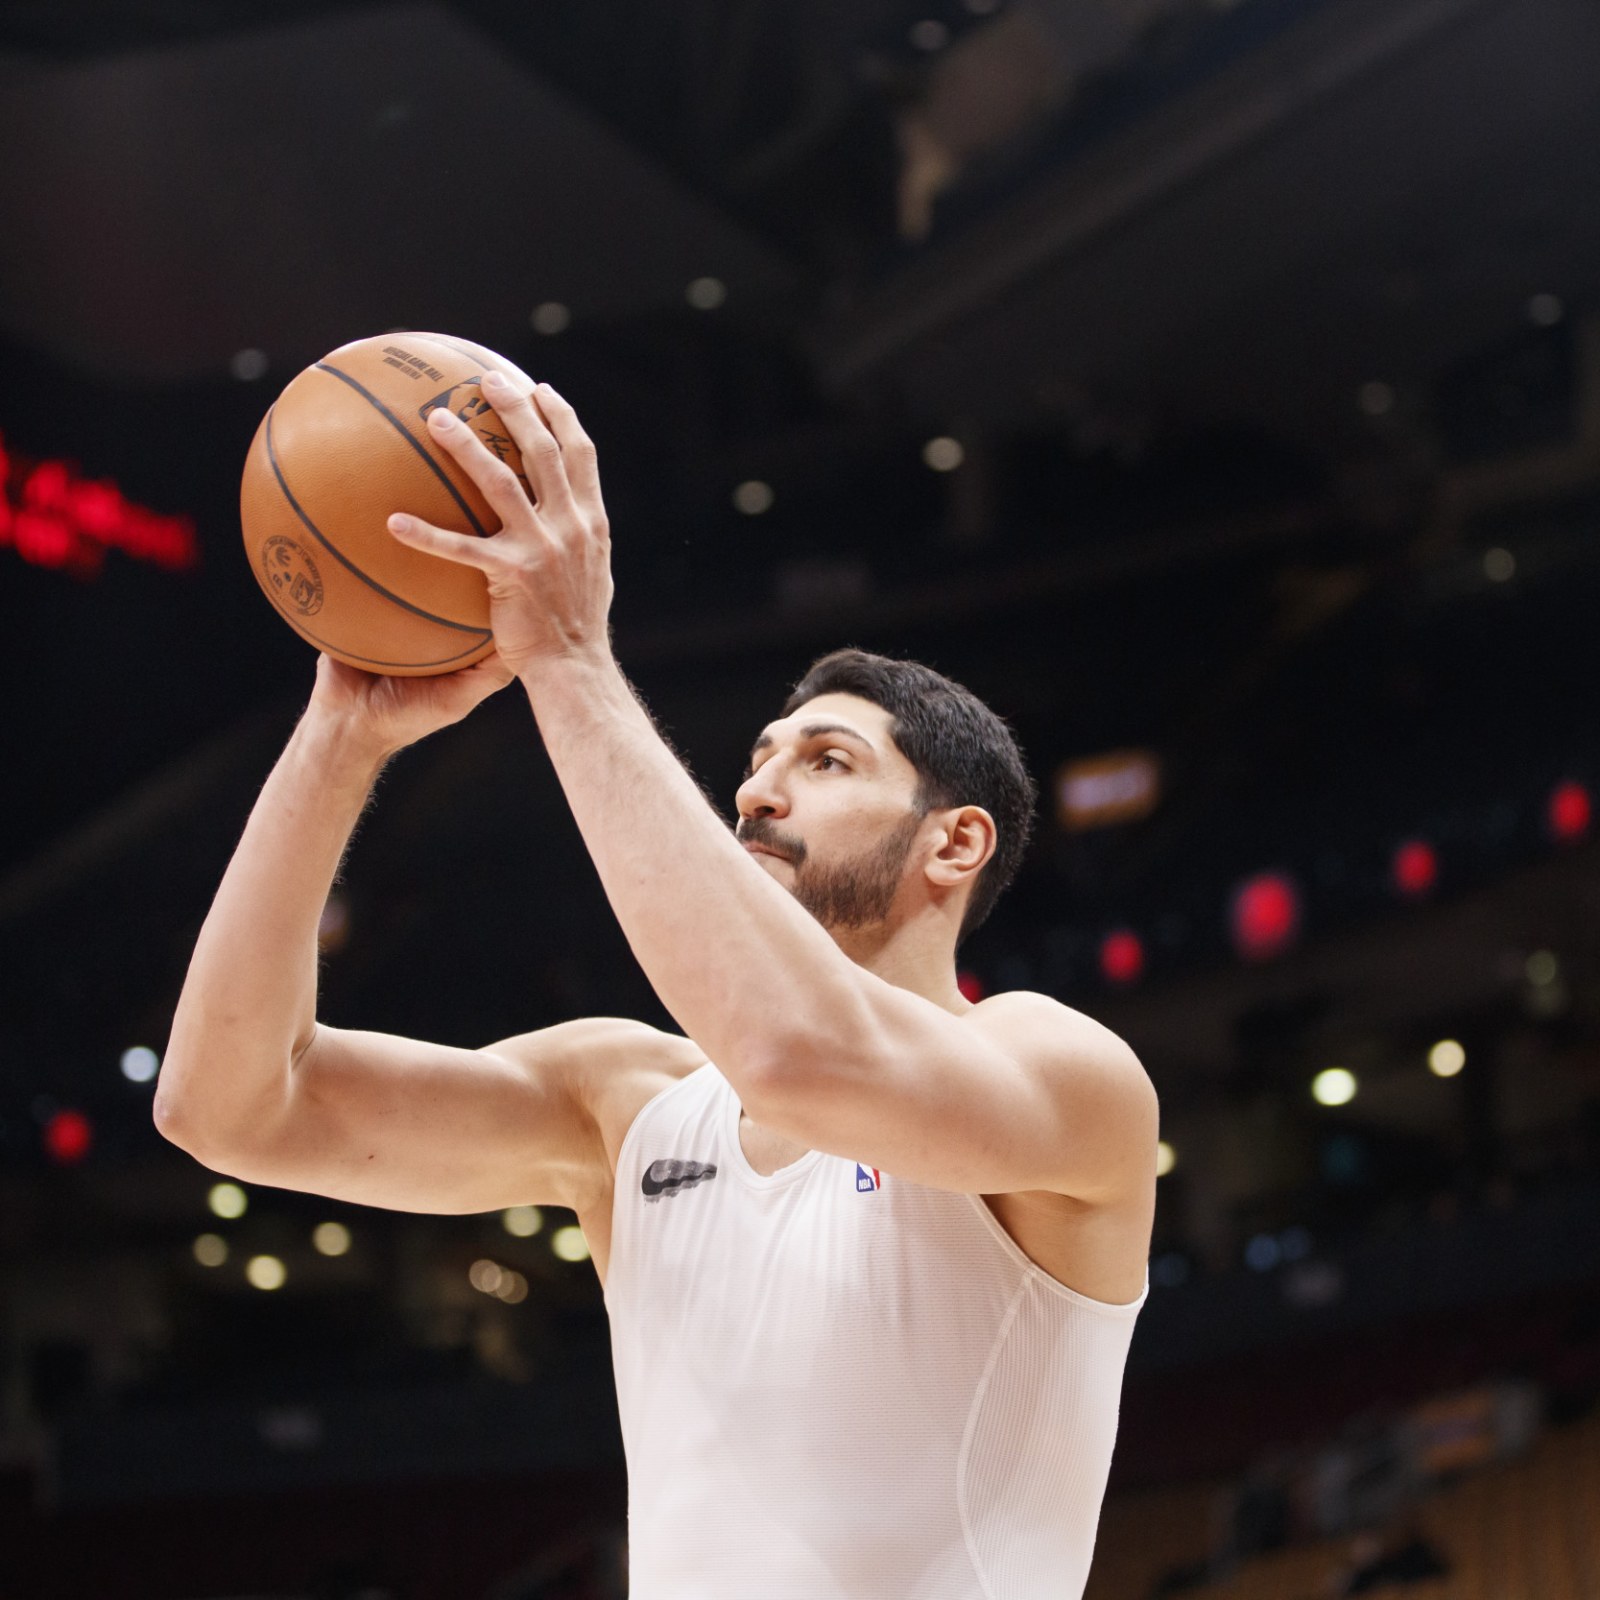 NBA star and activist changes name to Enes Kanter Freedom